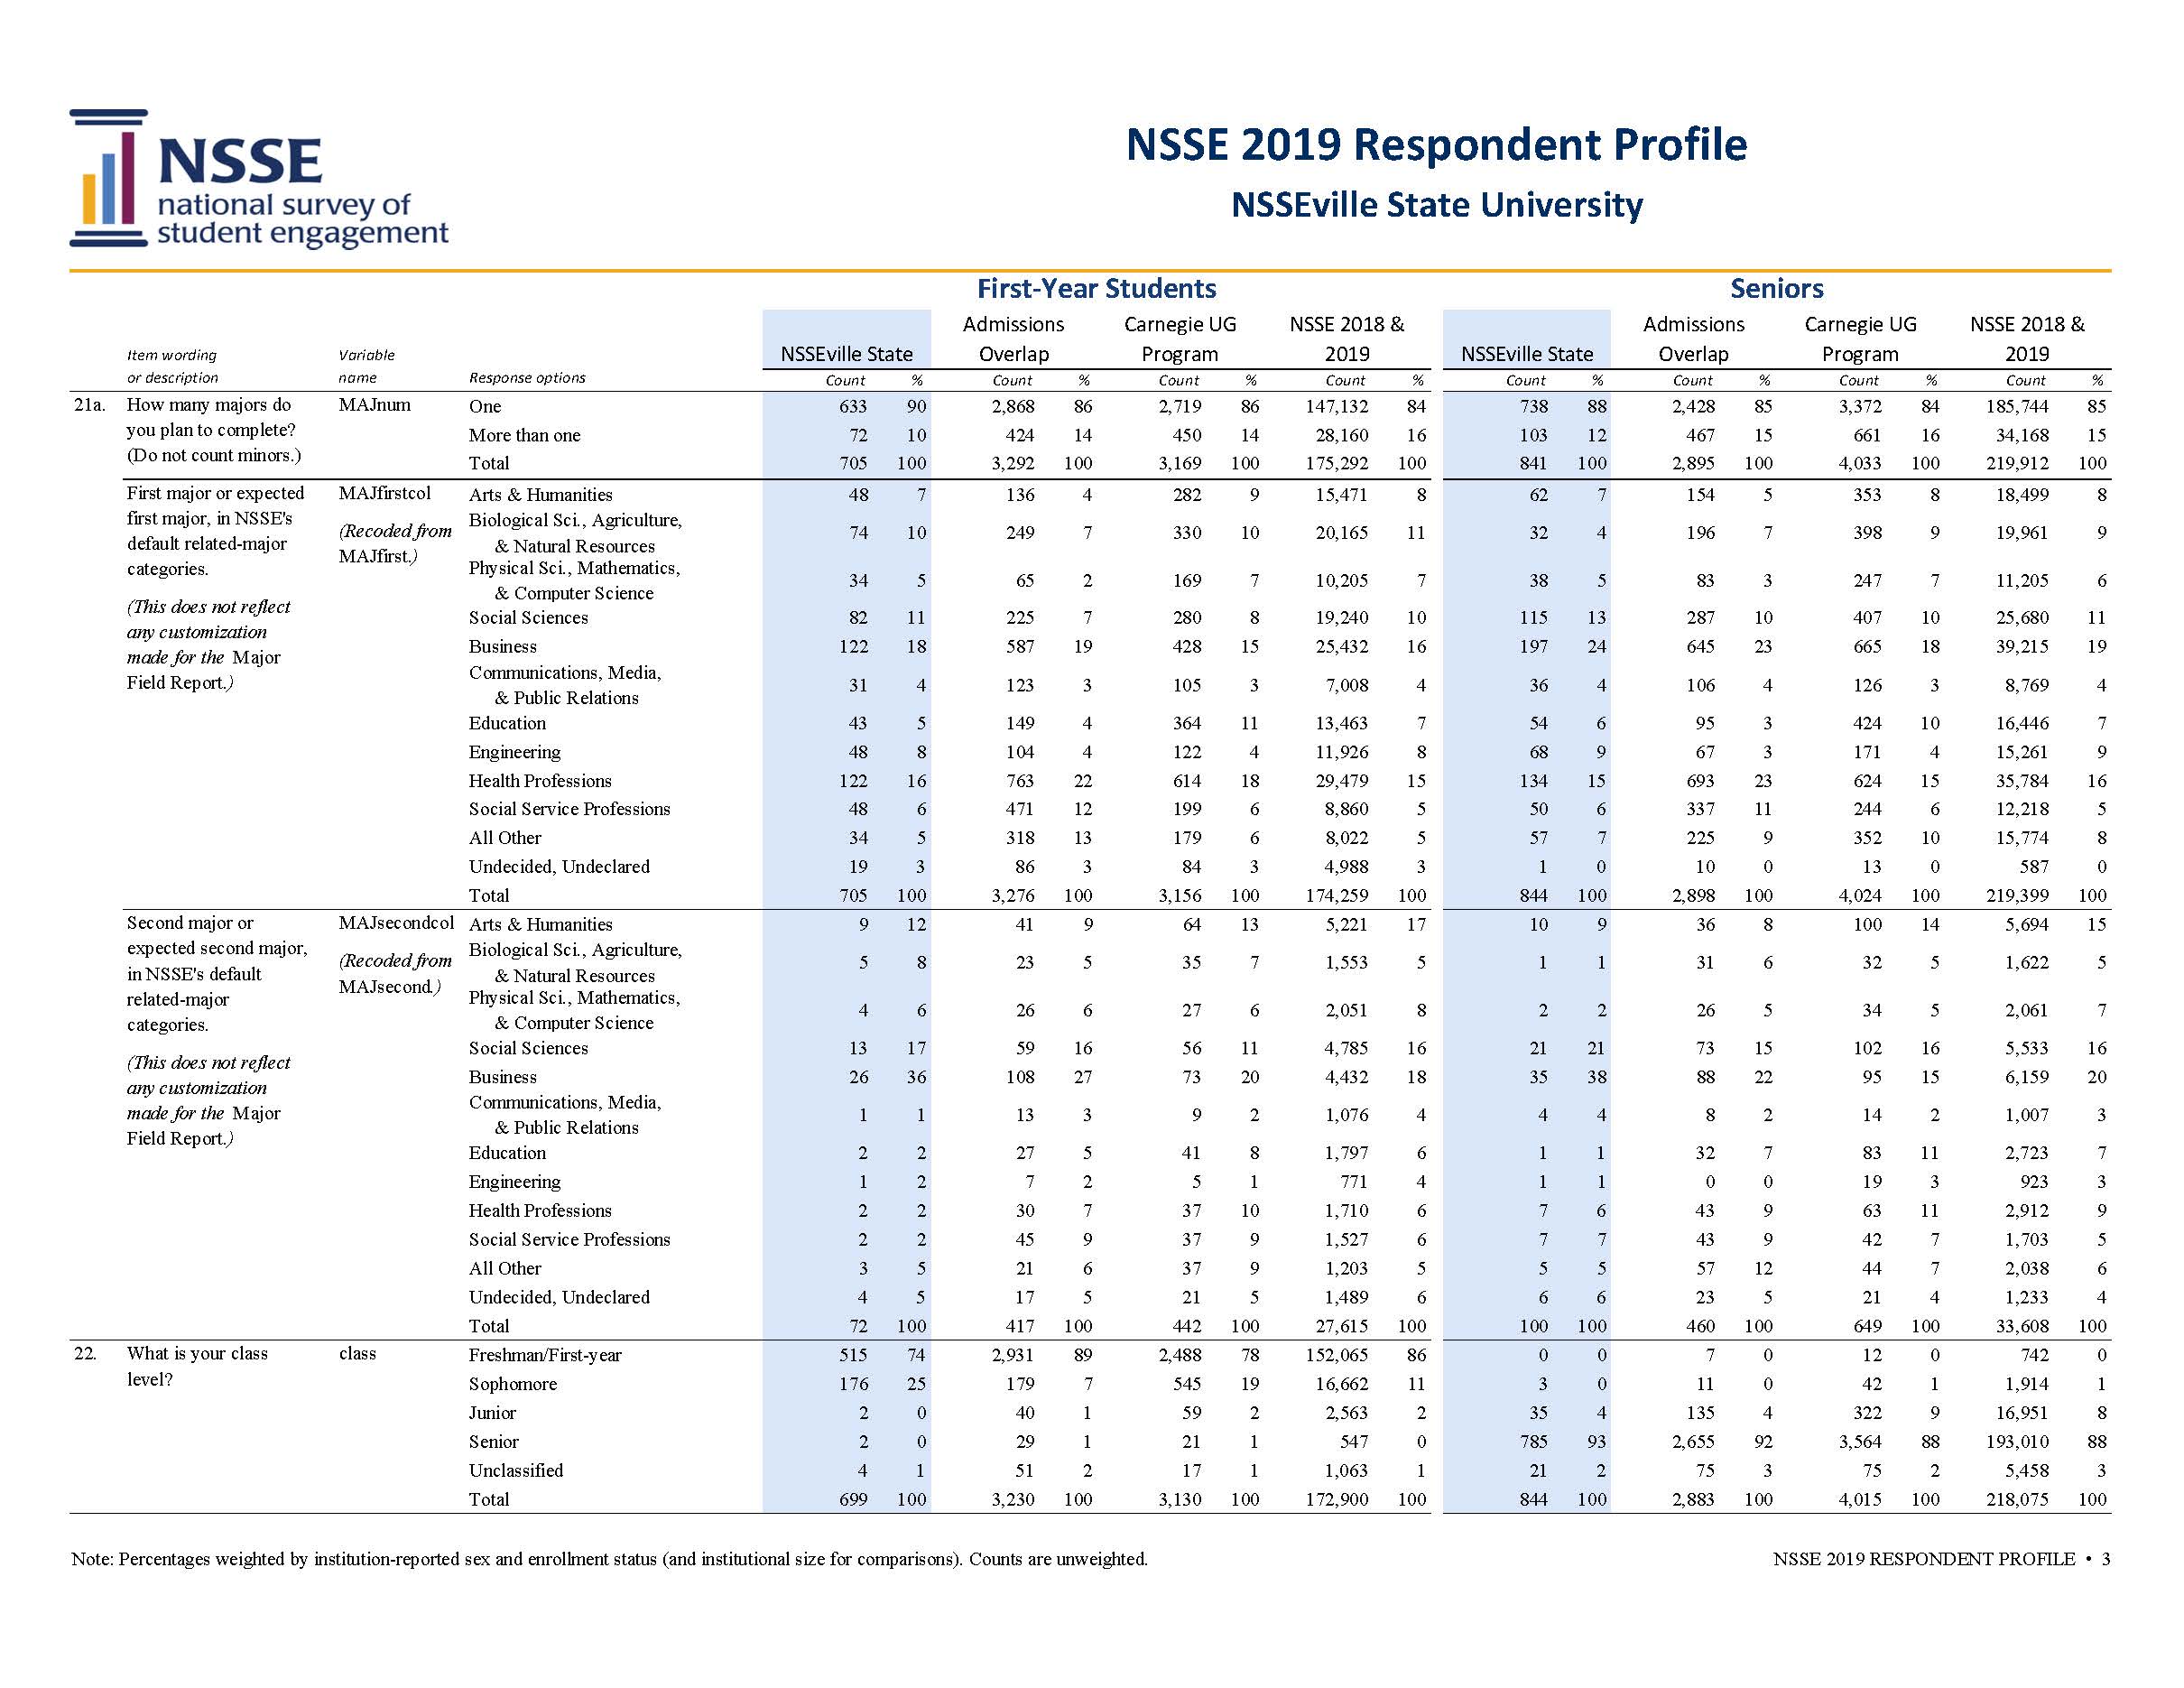 Sample Report: page 3 of NSSE Respondent Profile